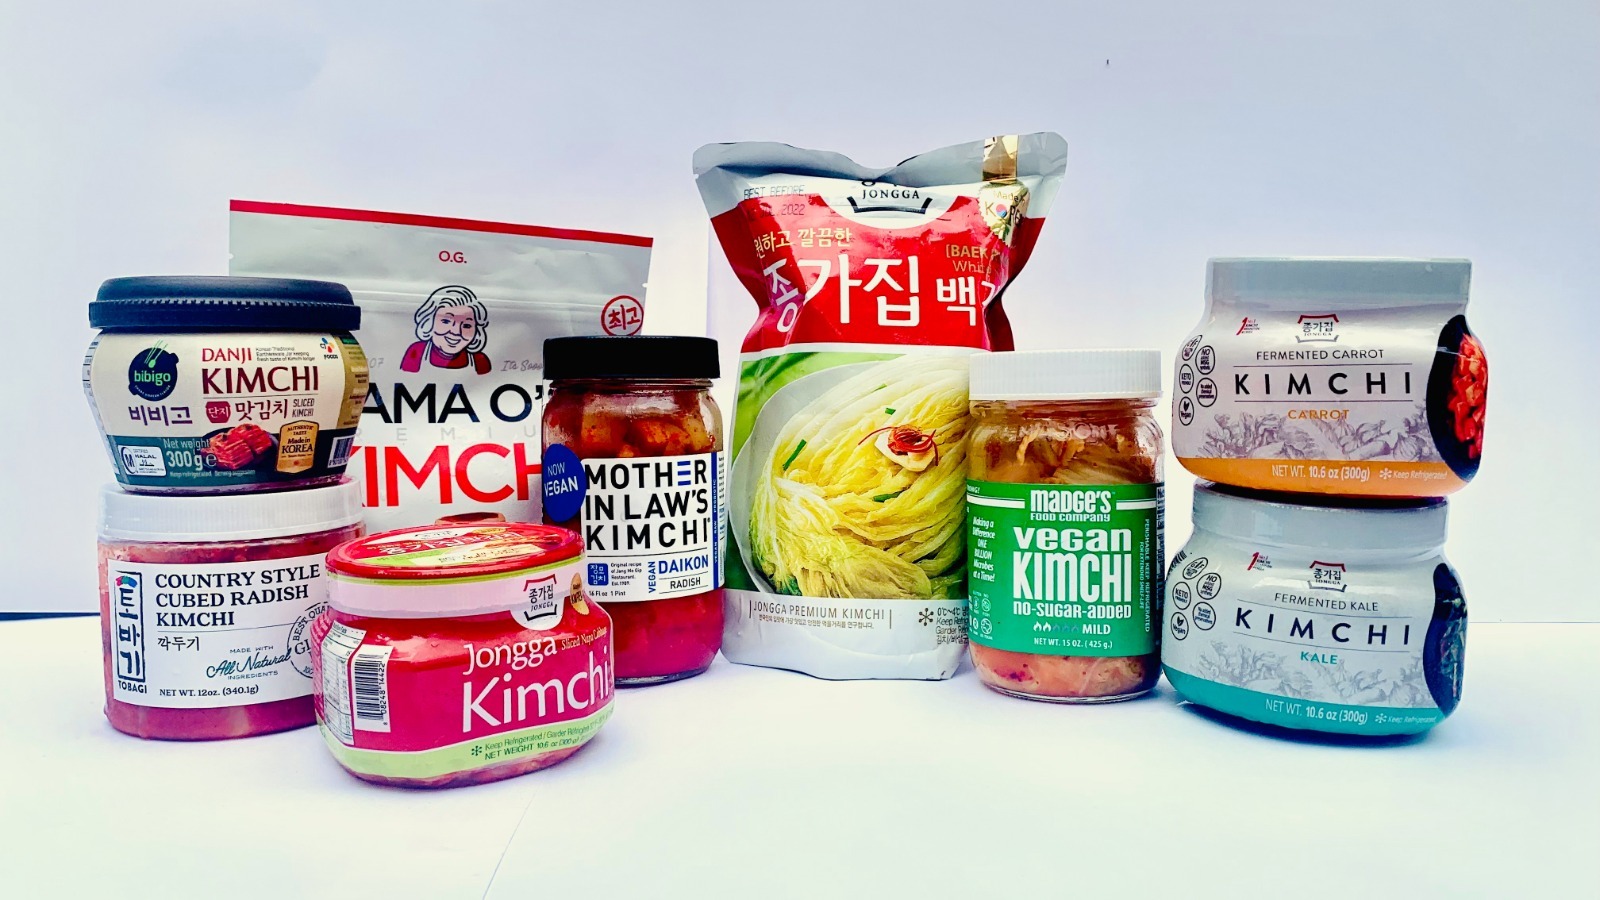 The Best Kimchi Brands Ranked